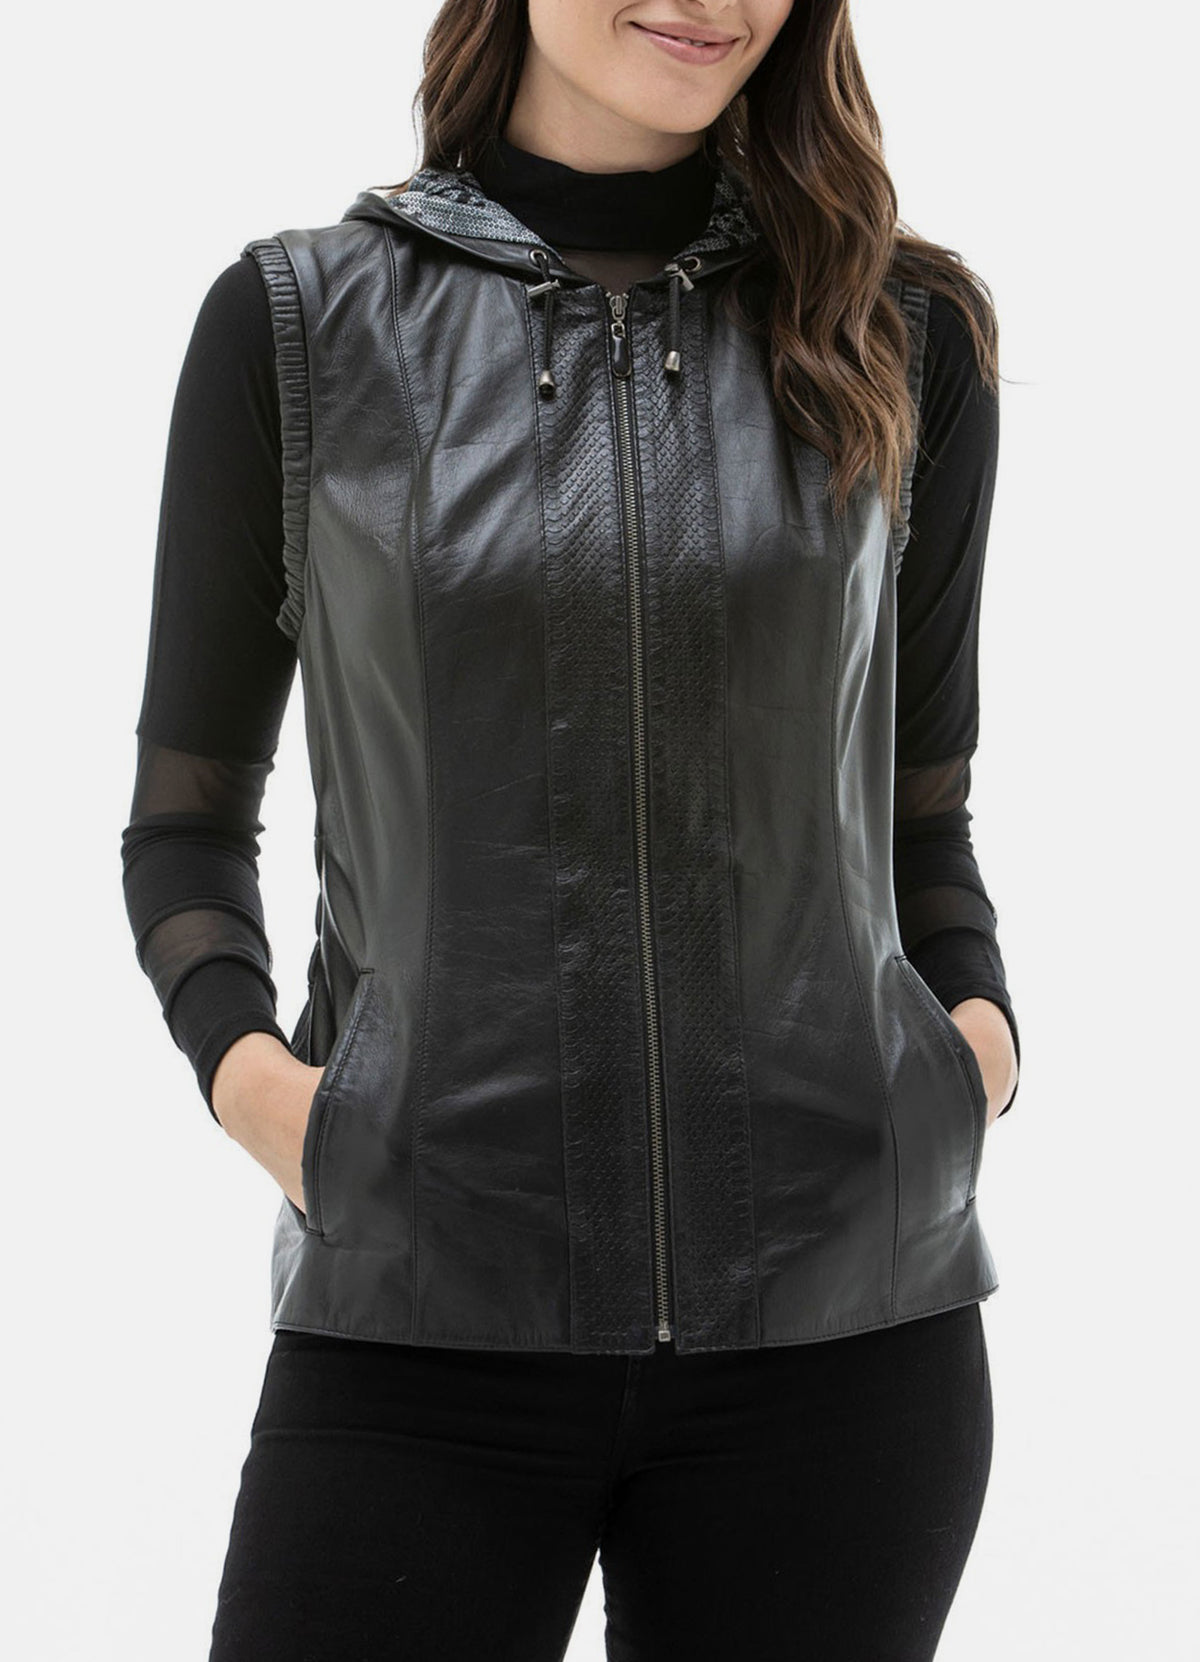 Womens Black Fashionable Hooded Leather Vest